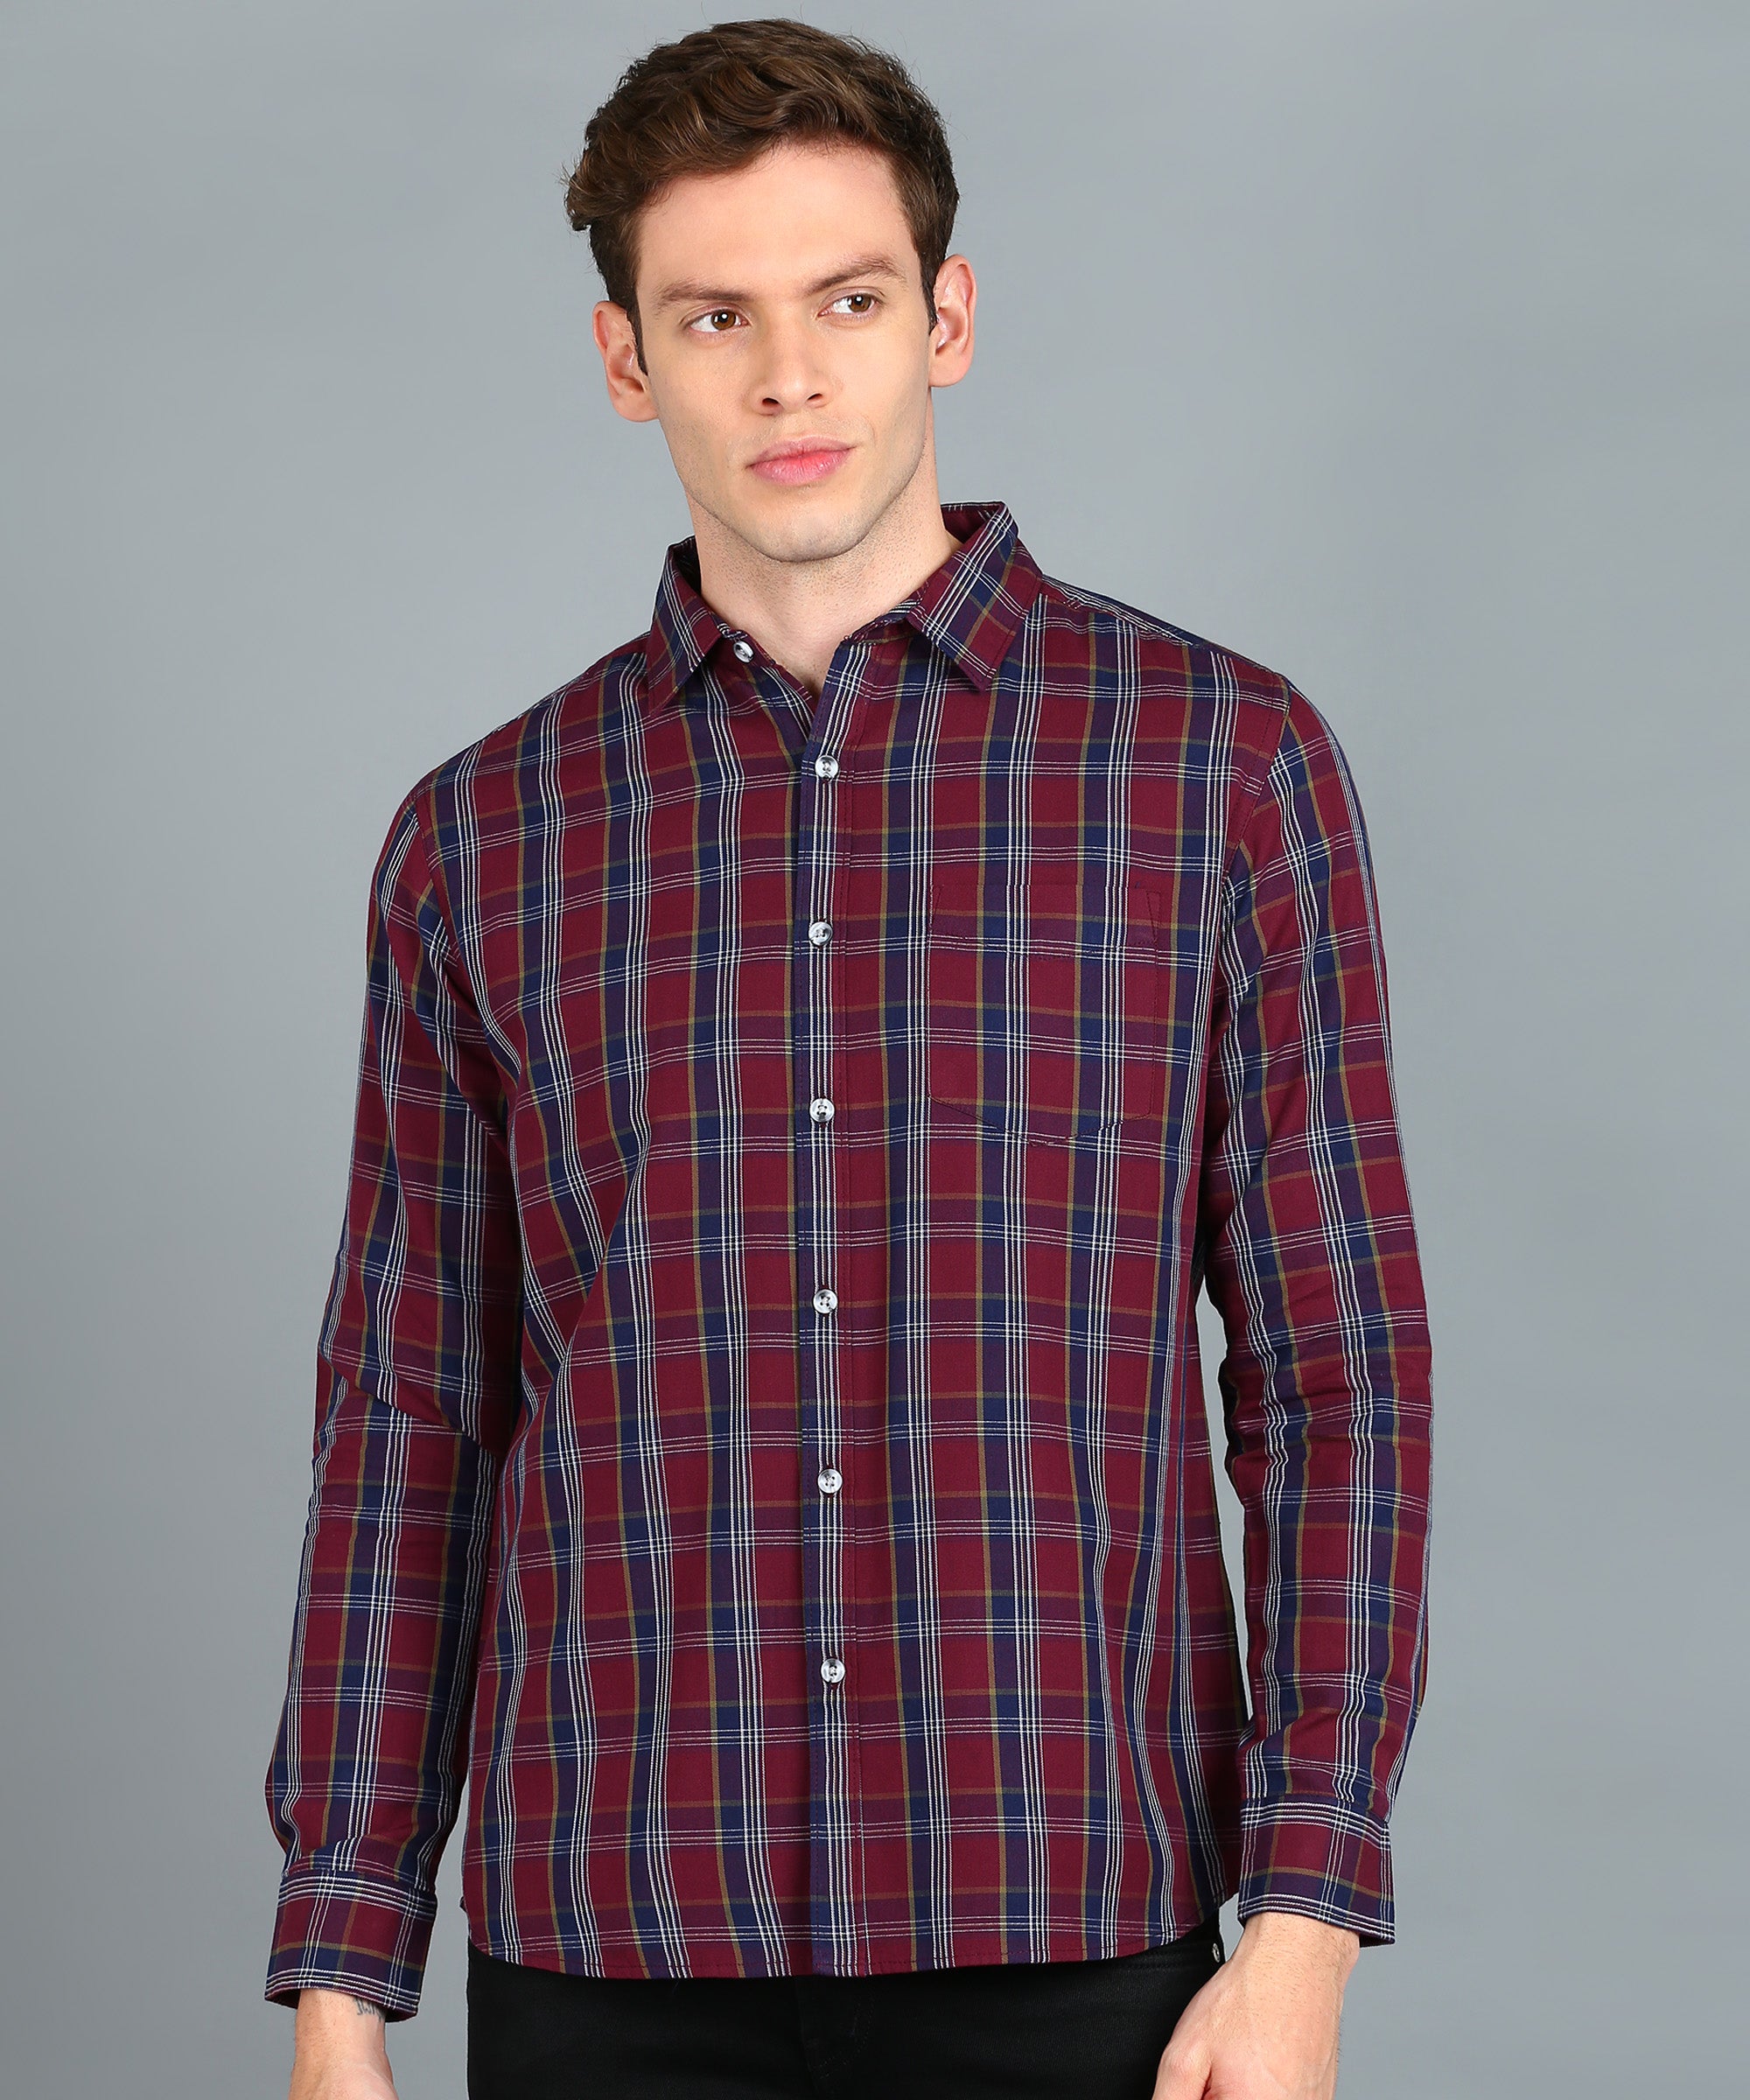 Men's Maroon, Blue Cotton Full Sleeve Slim Fit Casual Checkered Shirt